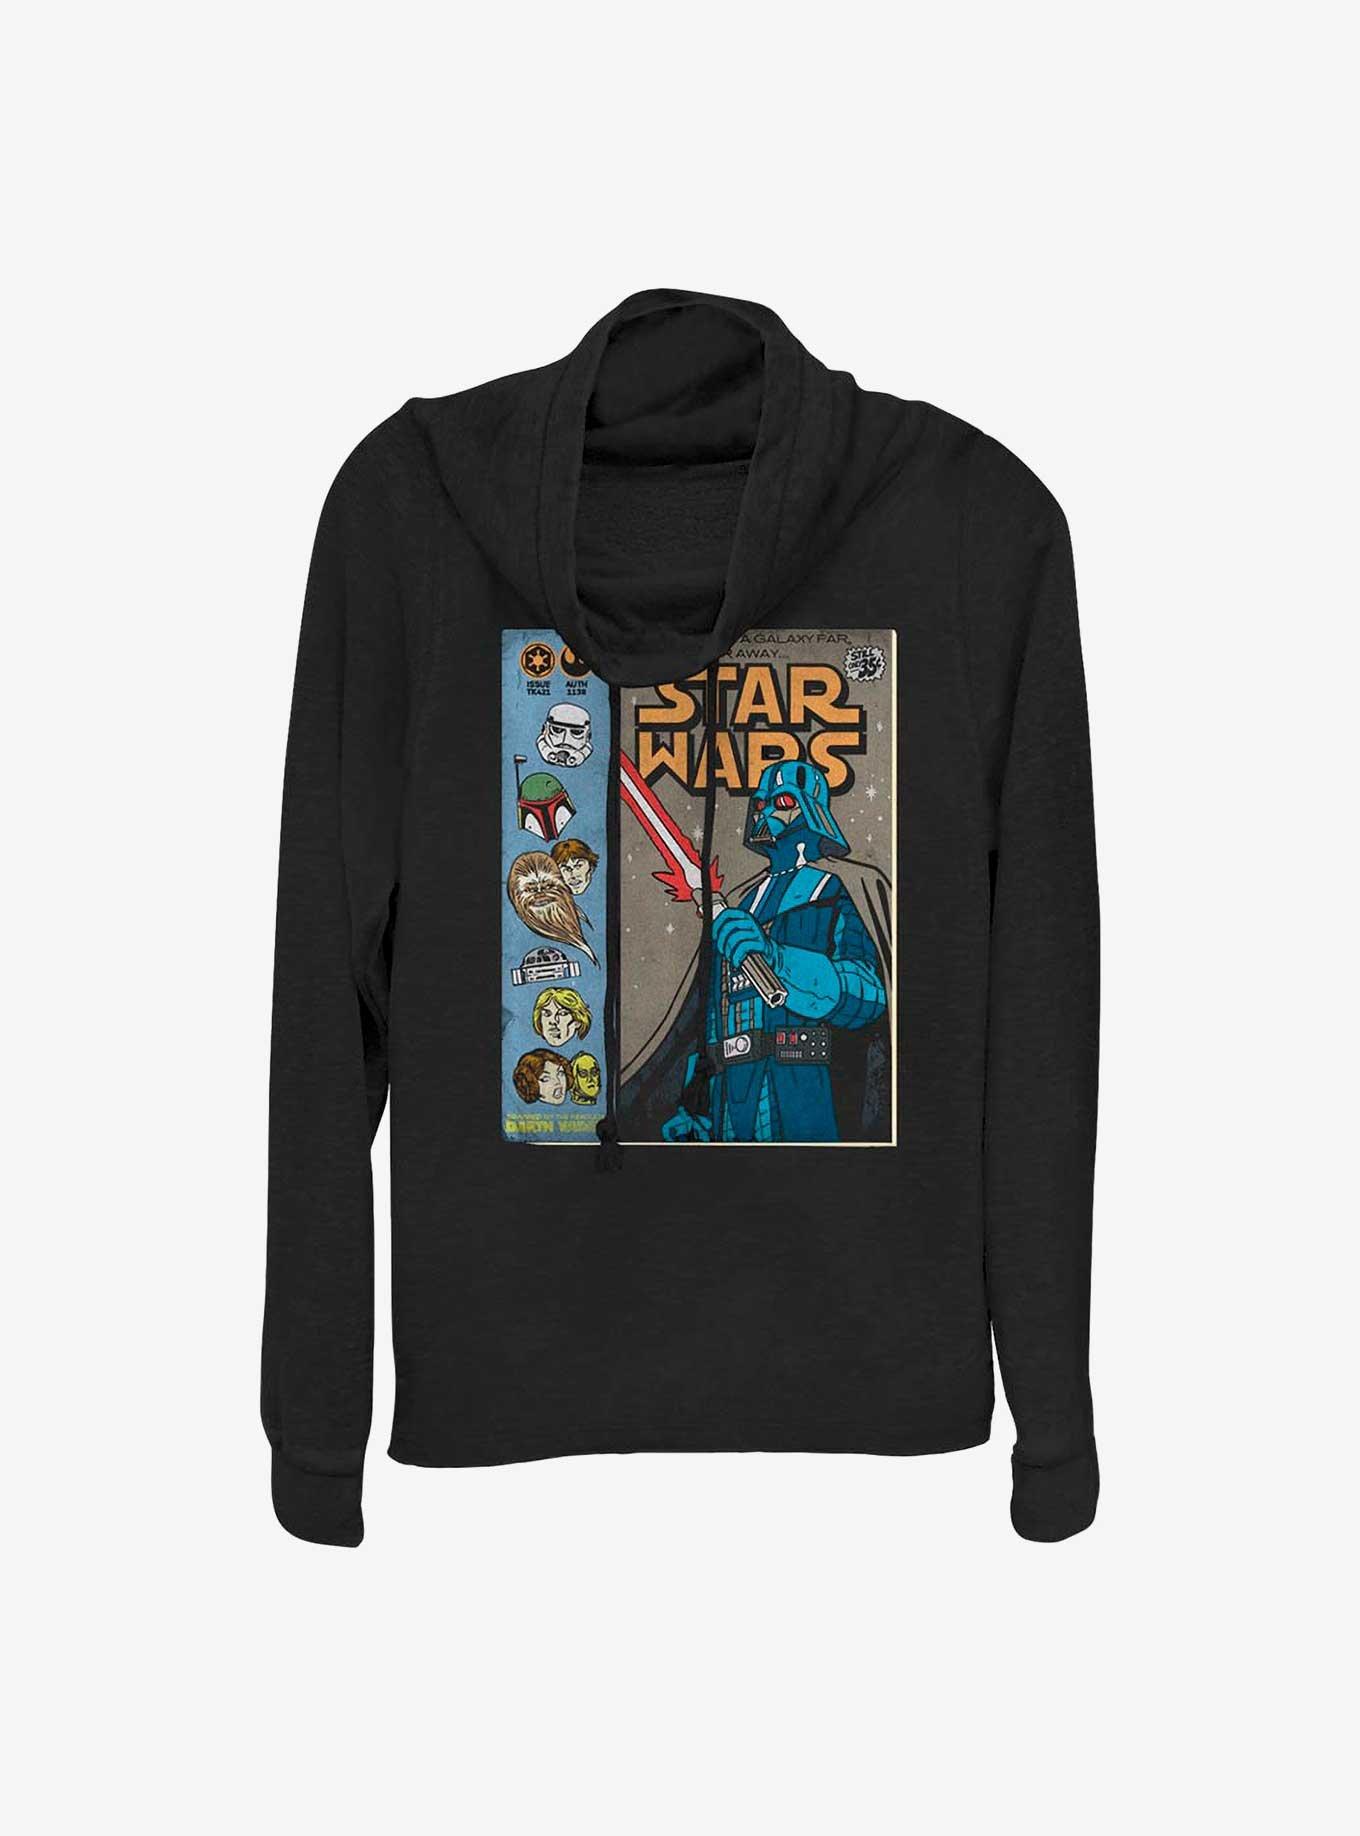 Star Wars About Face Darth Vader Cowl Neck Long-Sleeve Top